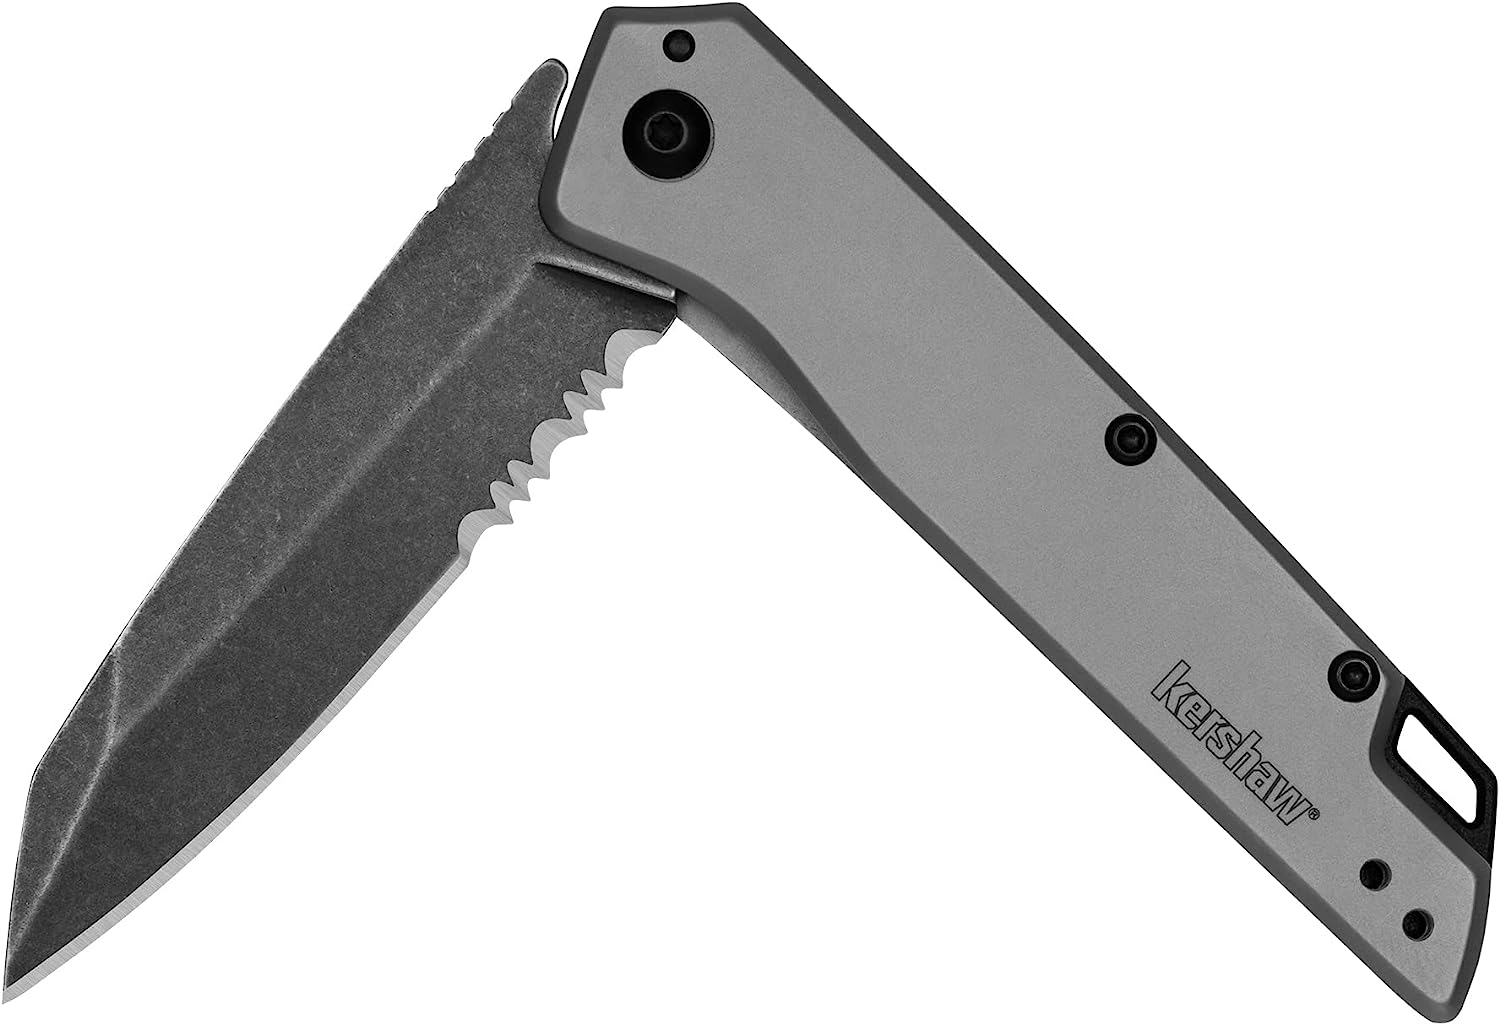 Kershaw Misdirect Pocketknife; 2.9 in blade - $23.13 with coupon